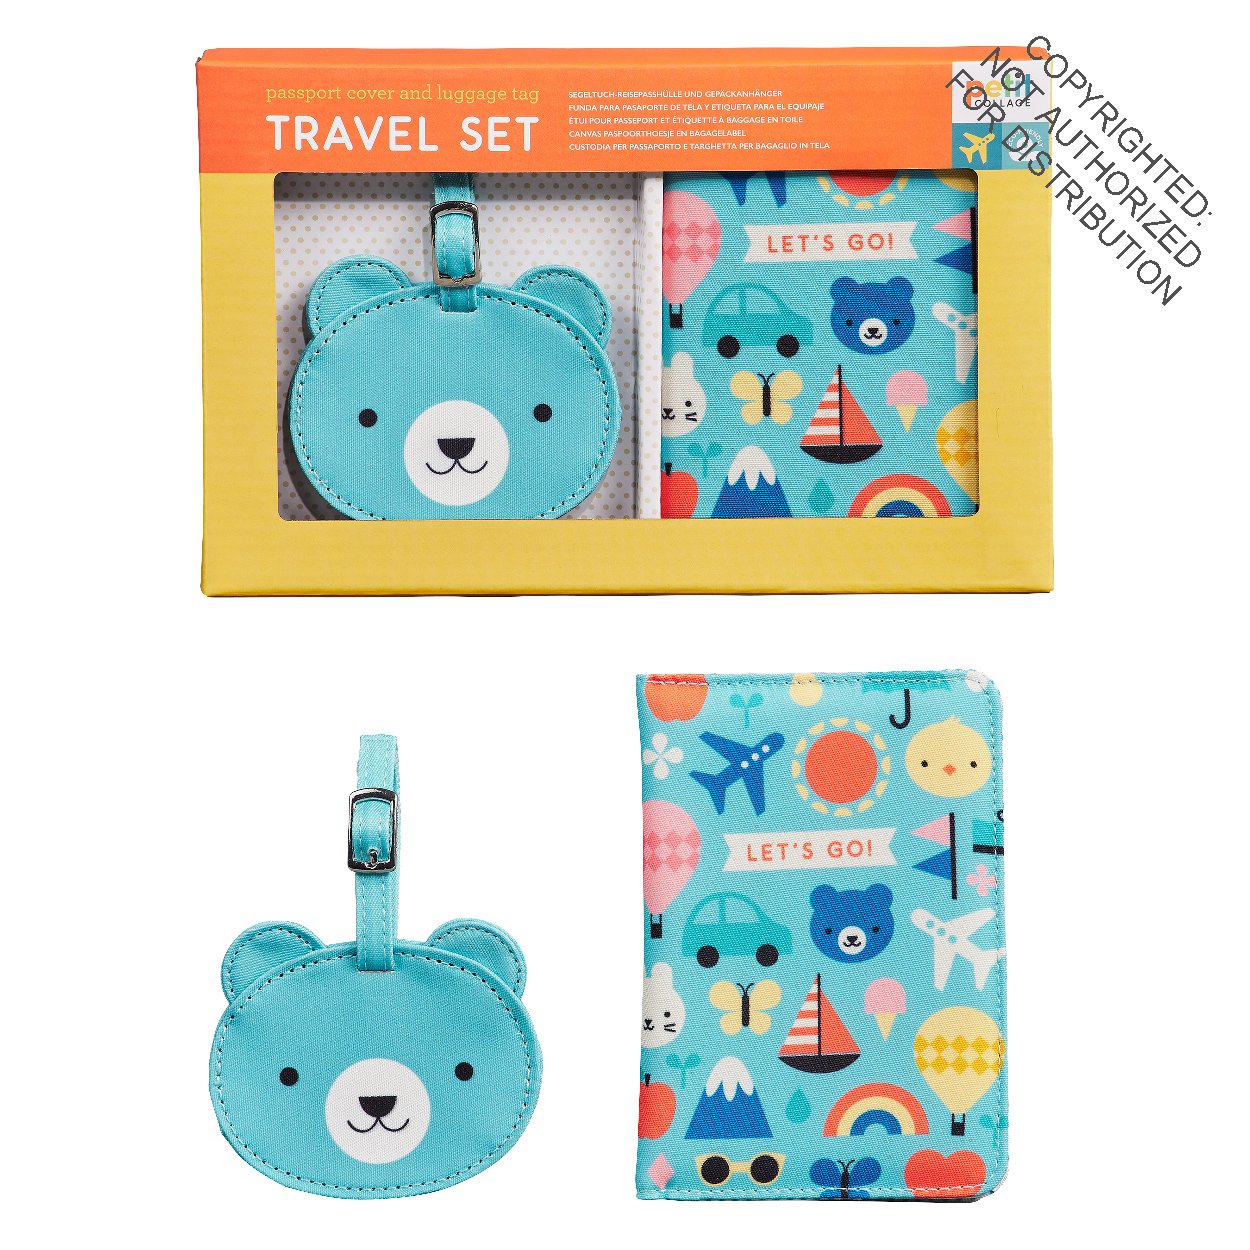 Baby Travel Set - Passport Cover and Luggage Tag